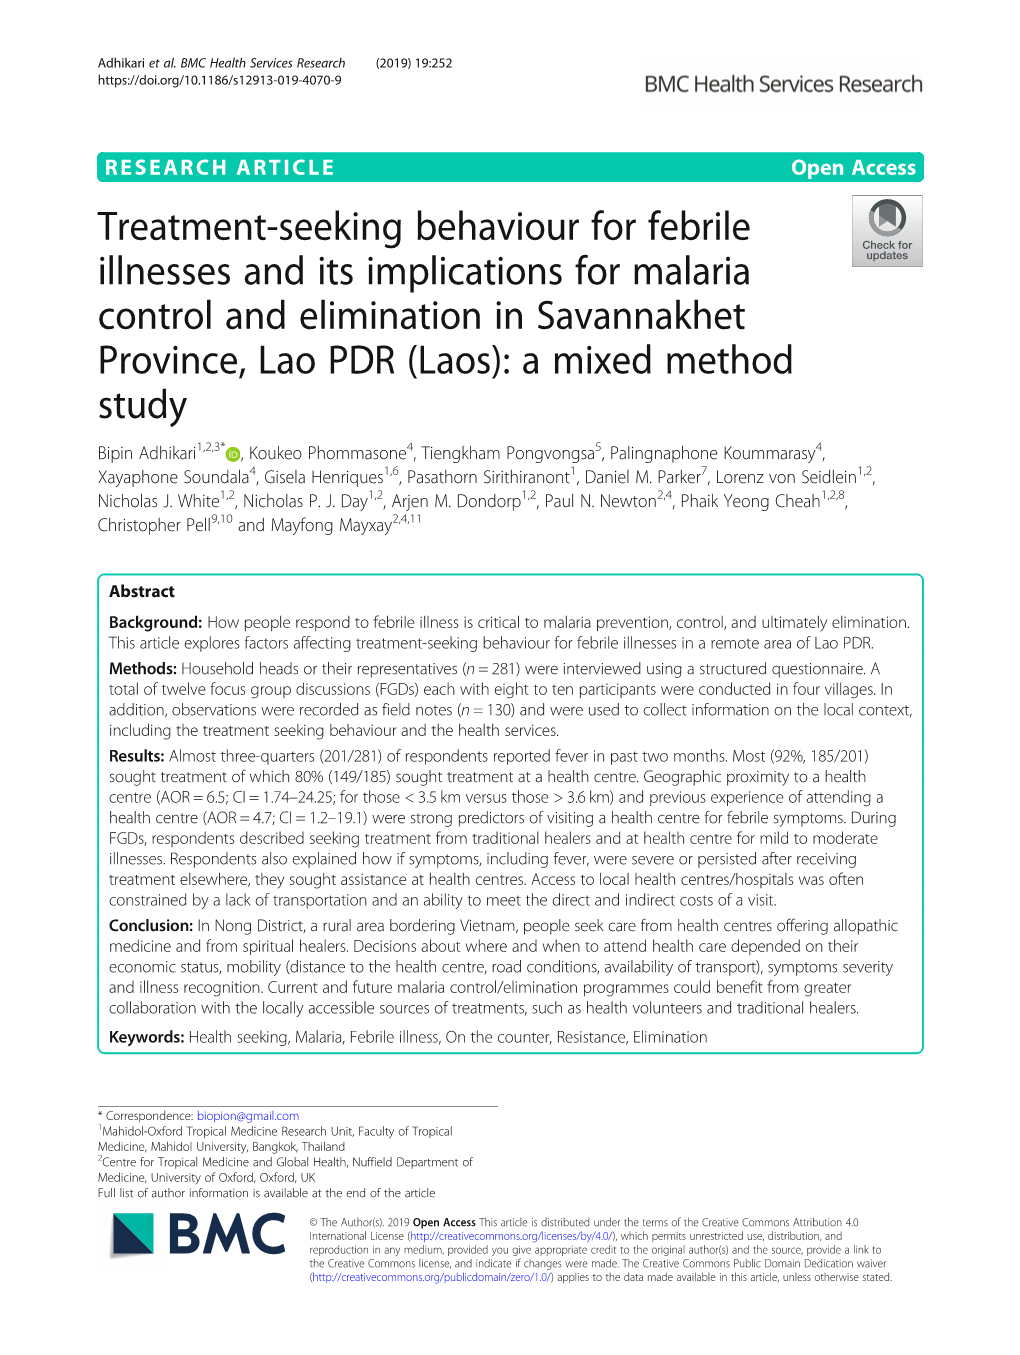 Treatment-Seeking Behaviour for Febrile Illnesses and Its Implications